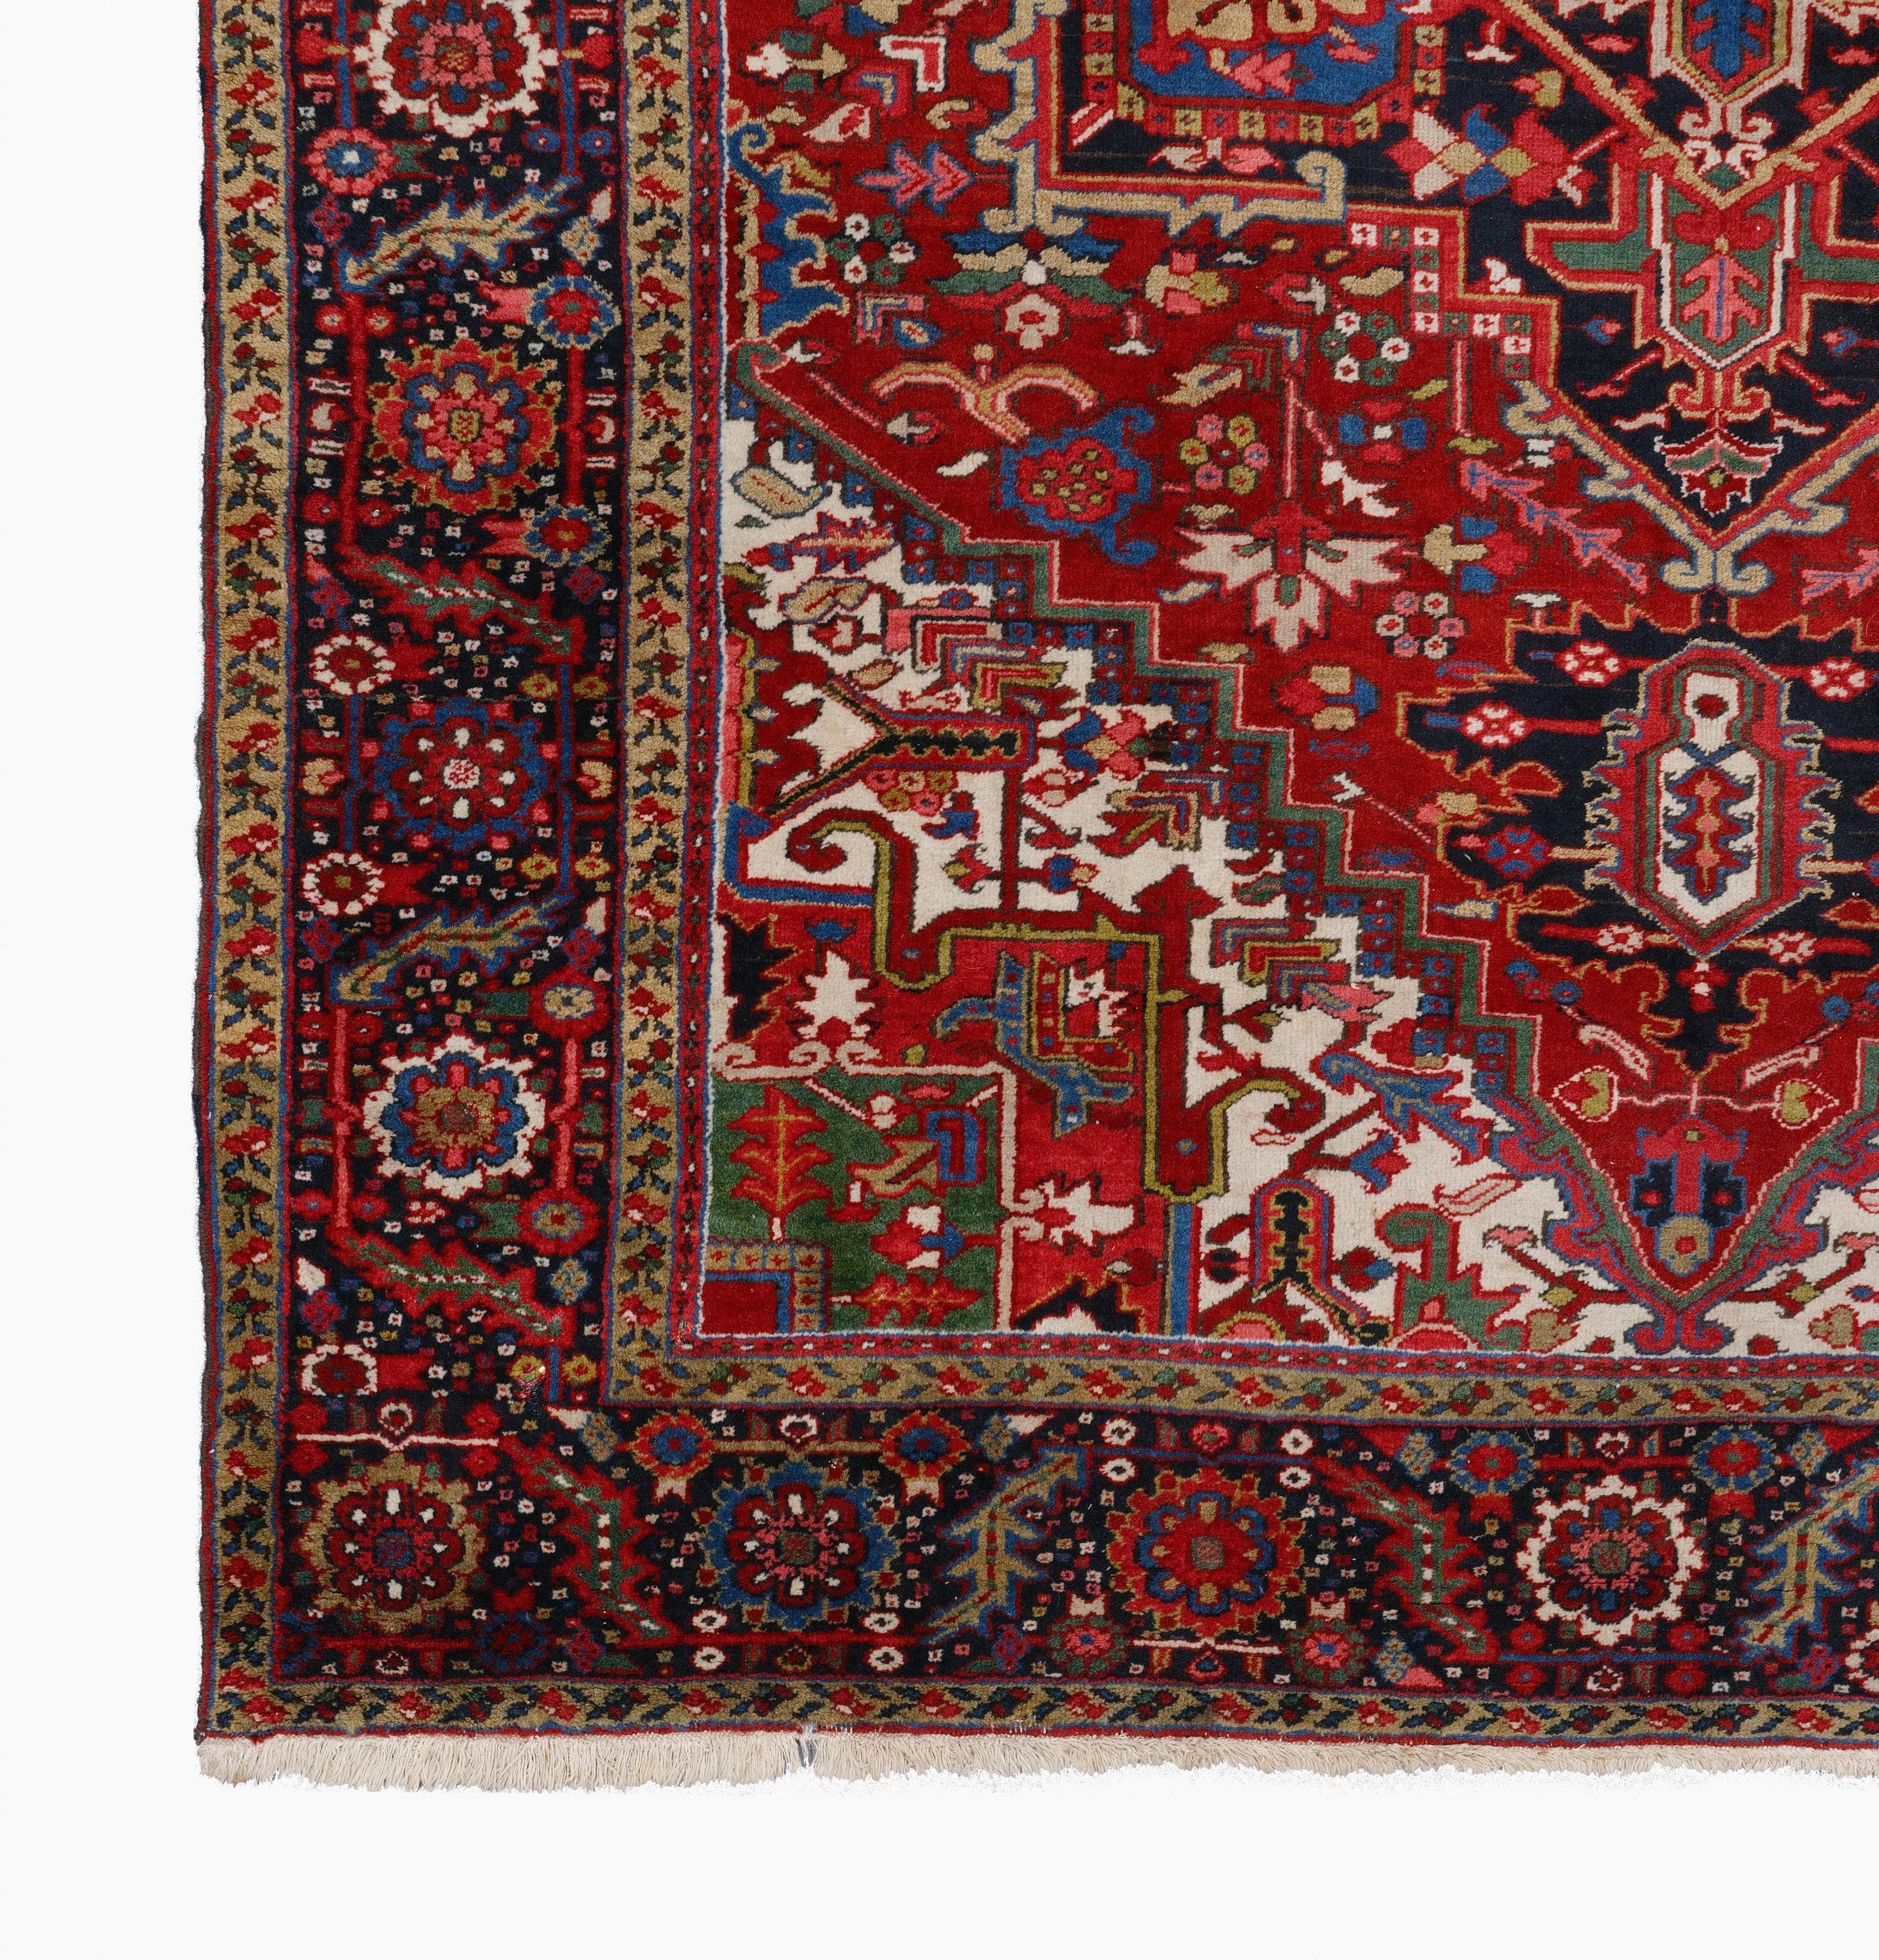 Antique Heriz Rug  Antique Rug
19th Century Heriz Rug in Good Condition 
Size: 236 x 332 cm

This Antique Heriz carpet is a work of art woven in the 19th century. This carpet, dominated by the color red, has geometric and floral patterns enriched